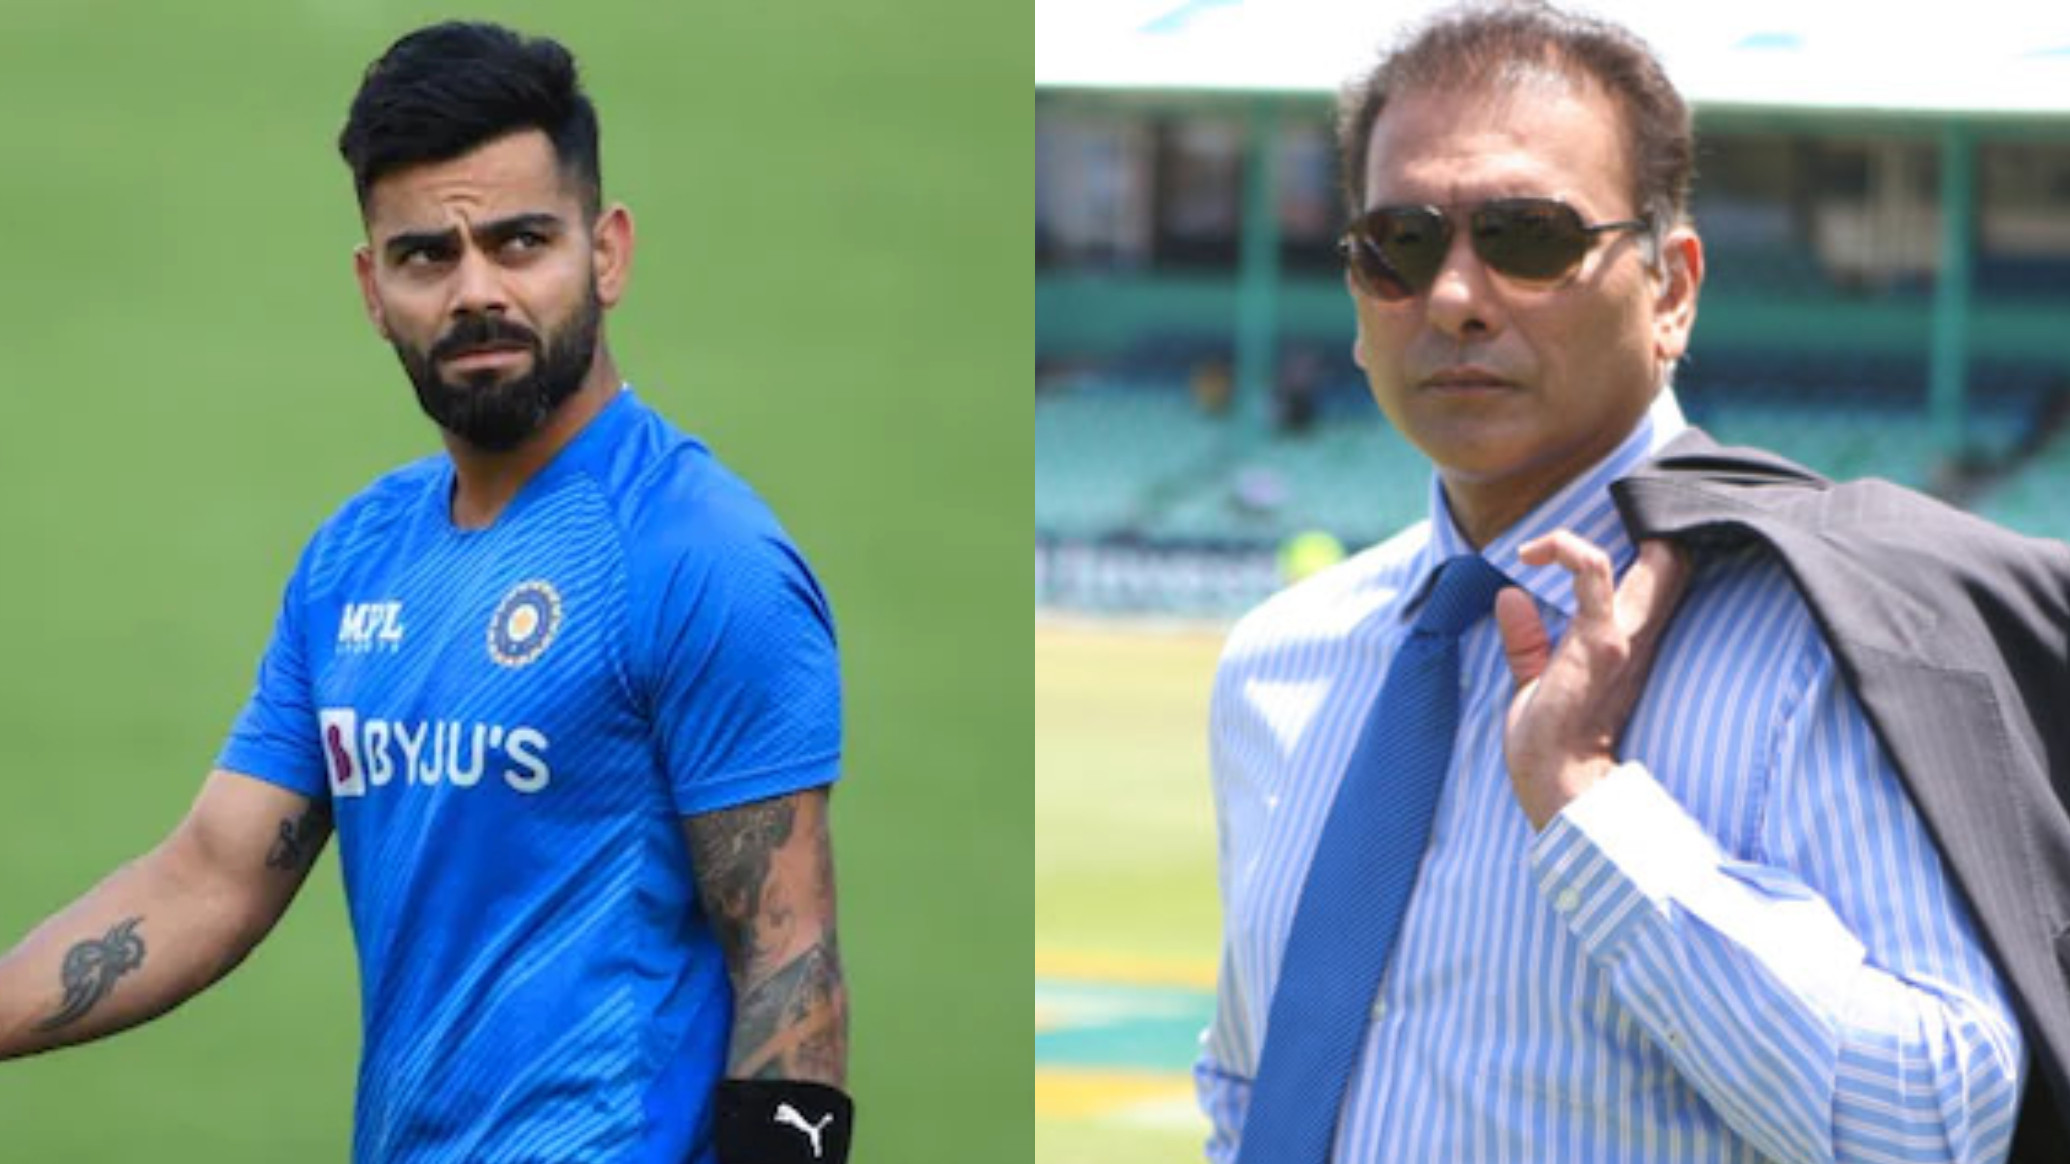 Asia Cup 2022: 'If Virat Kohli gets a fifty in first game, mouths will be shut'- Ravi Shastri ahead of India-Pakistan tie